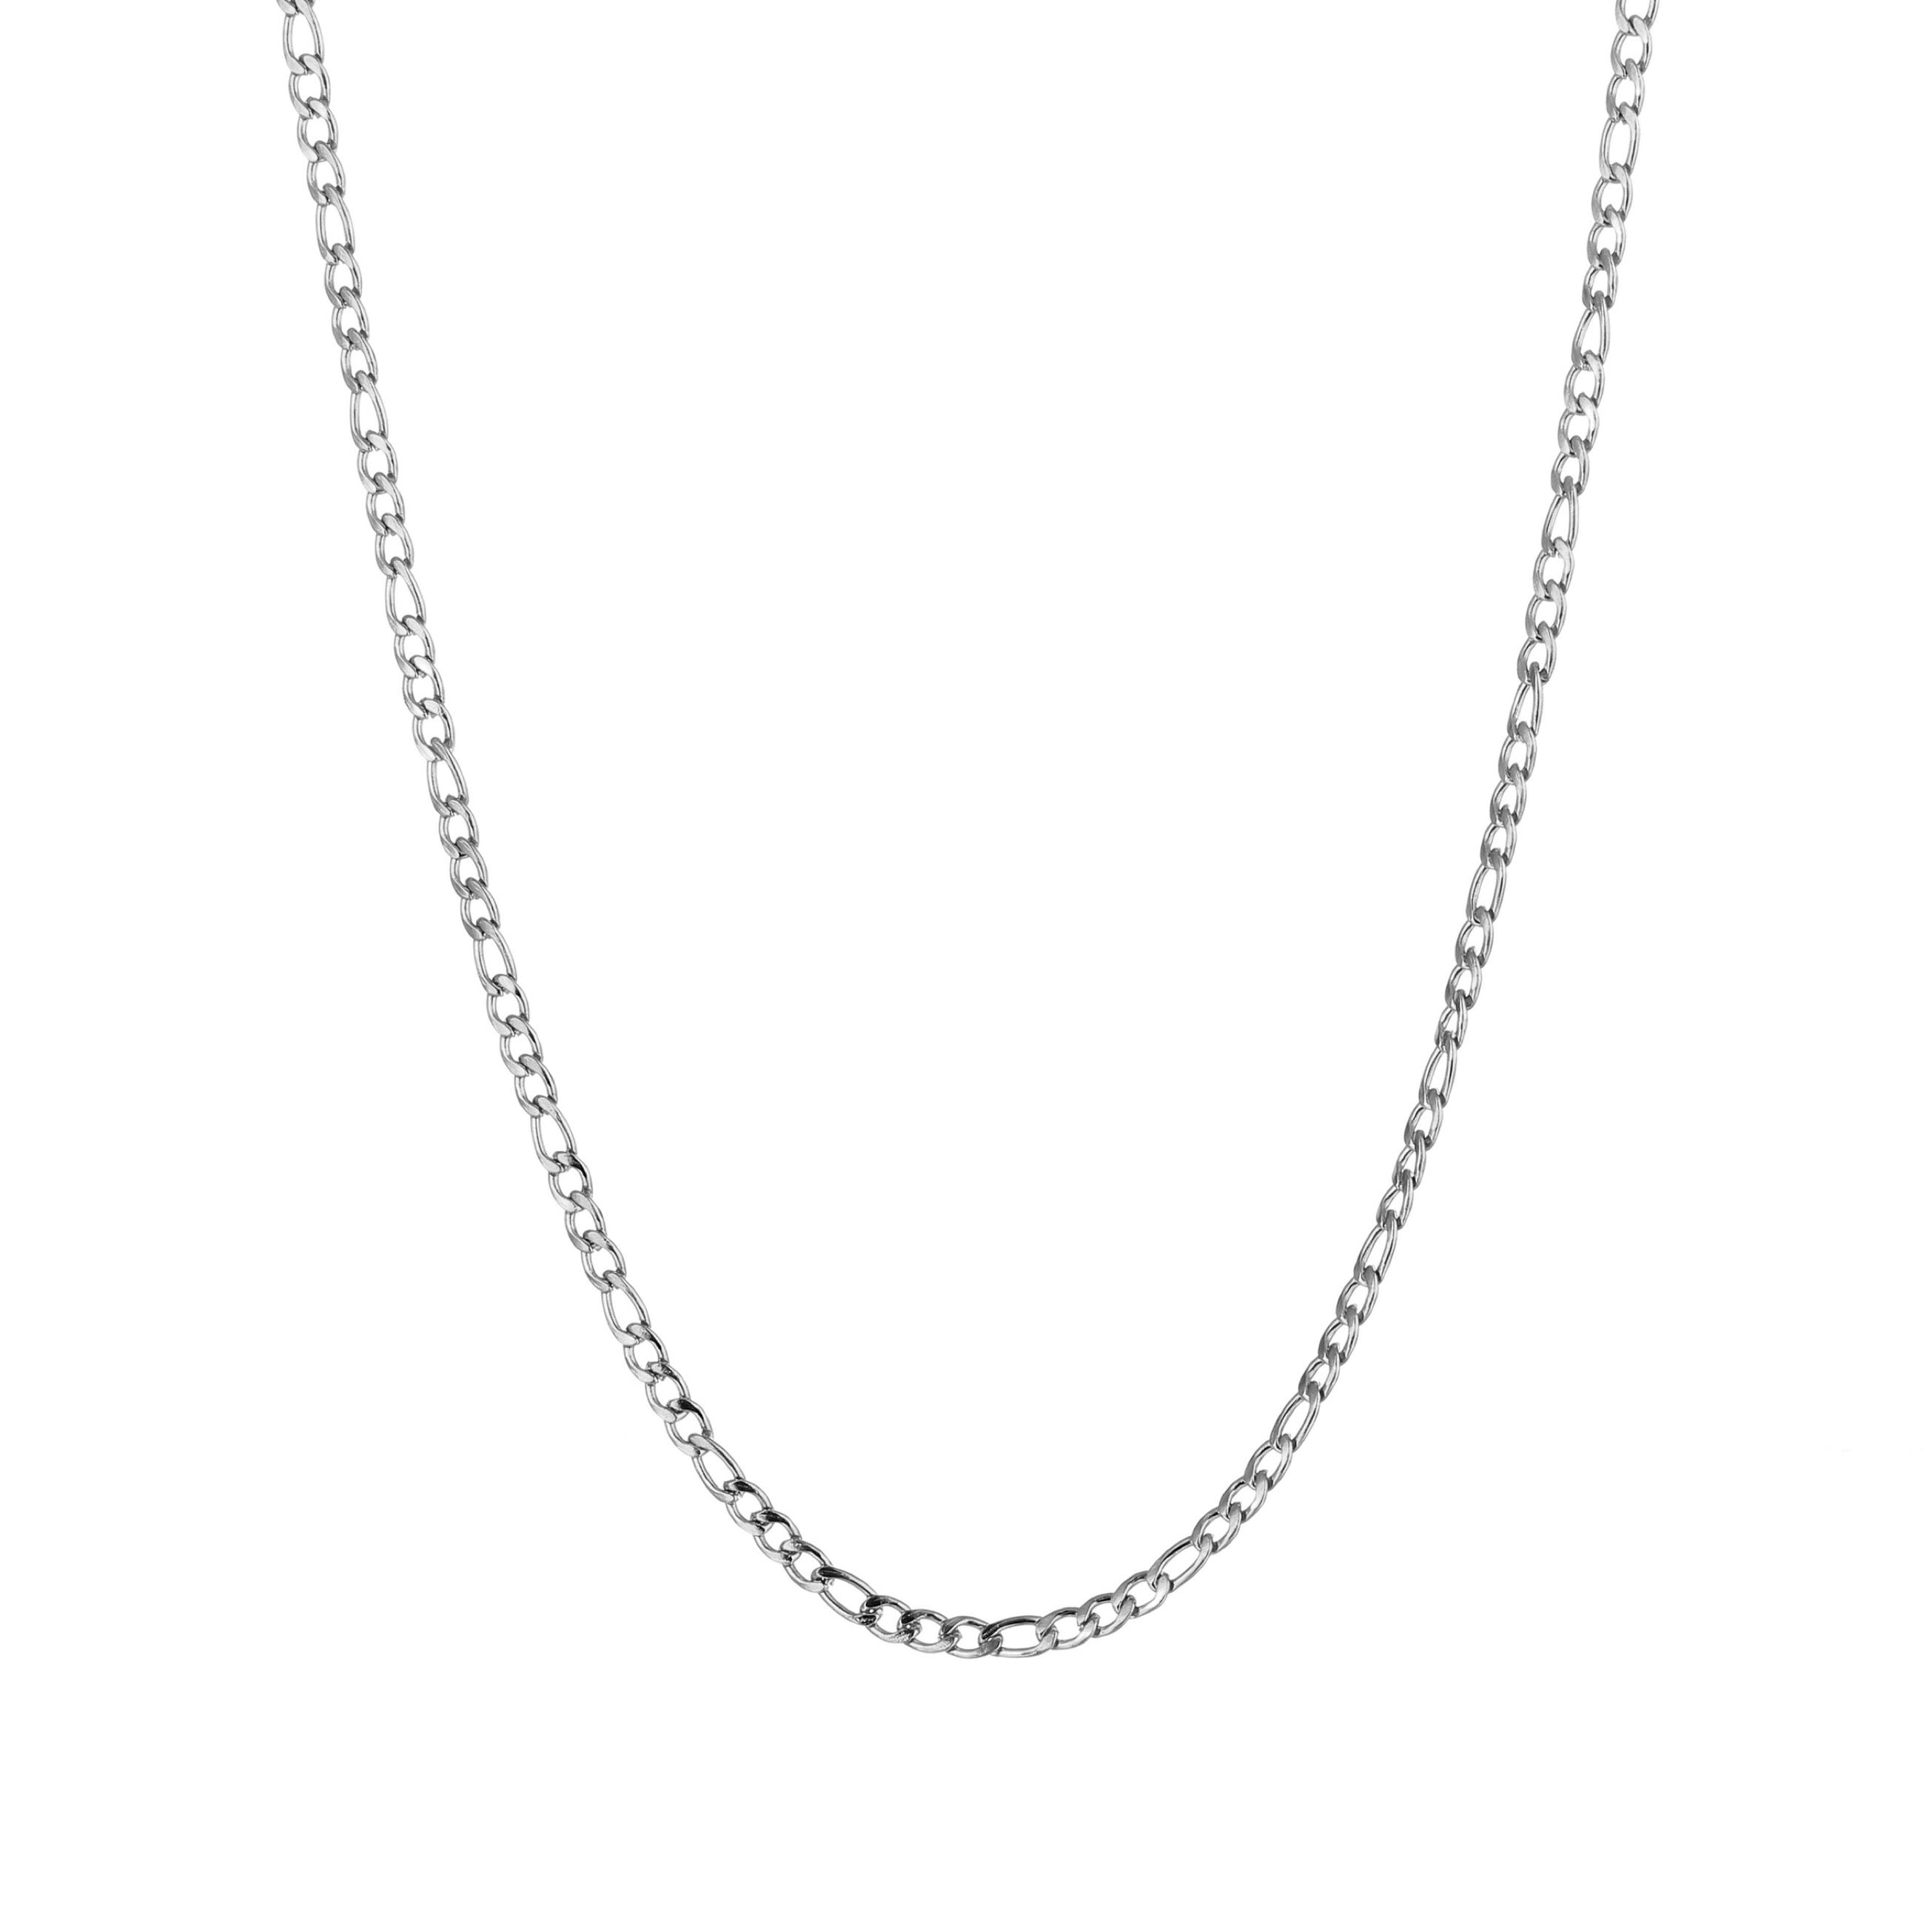 The Vera necklace is based off a traditional Figaro Chain design 
With its classic design and meticulously crafted links, this medium-length (collarbone) chain adds 